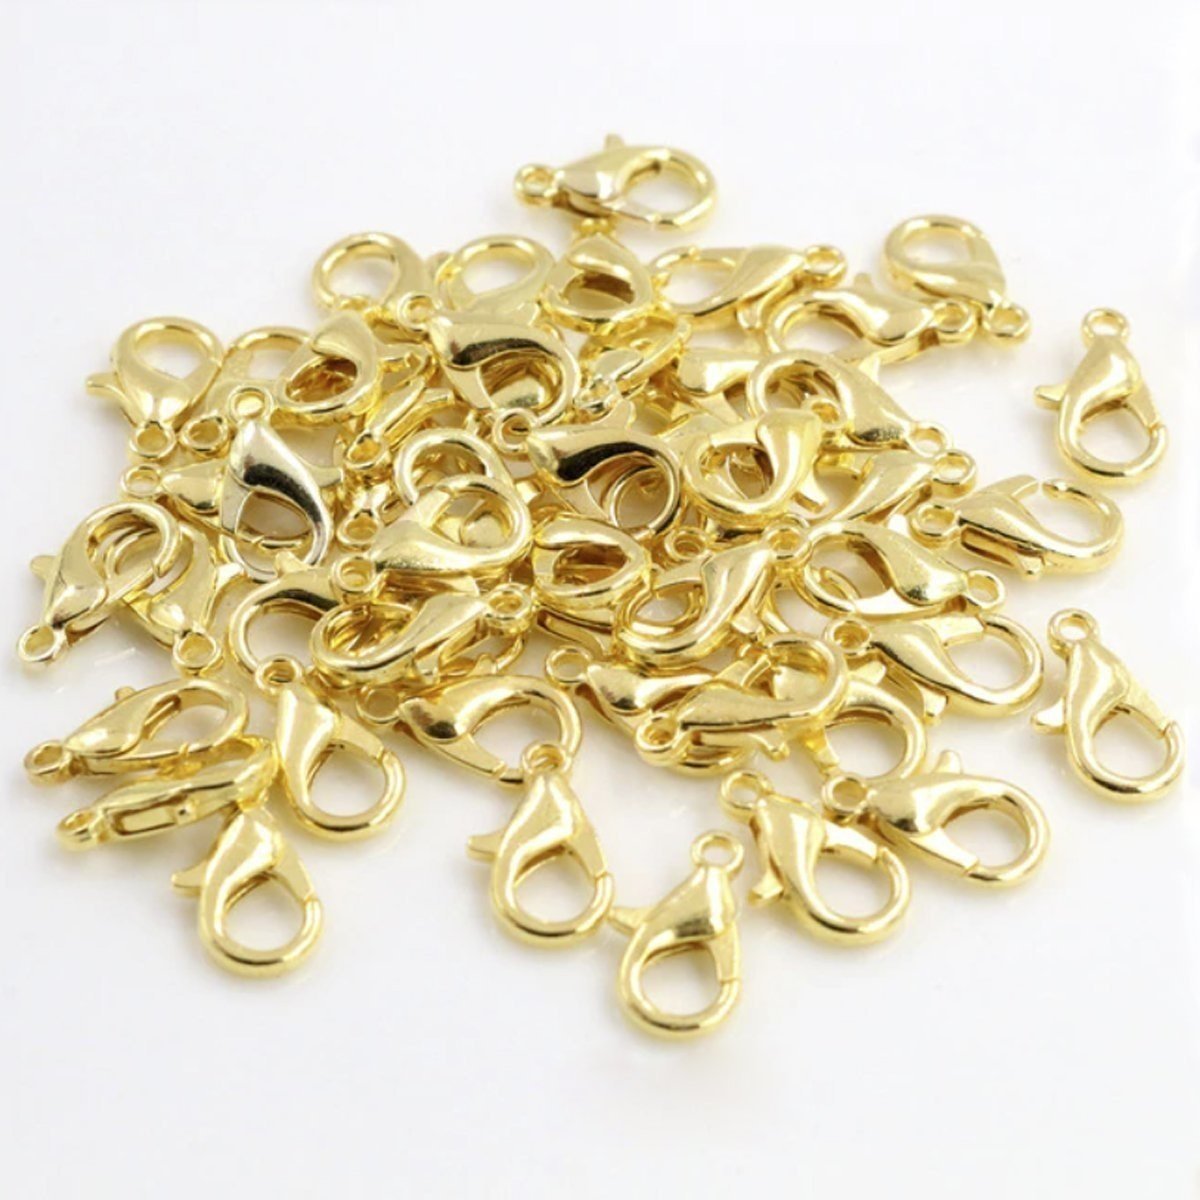 10pcs Plated Fashion Jewellery Alloy Lobster Clasp Hooks for Necklace & Bracelet Chain DIY Making Small Keyring - Gold 10x5mm - - Asia Sell